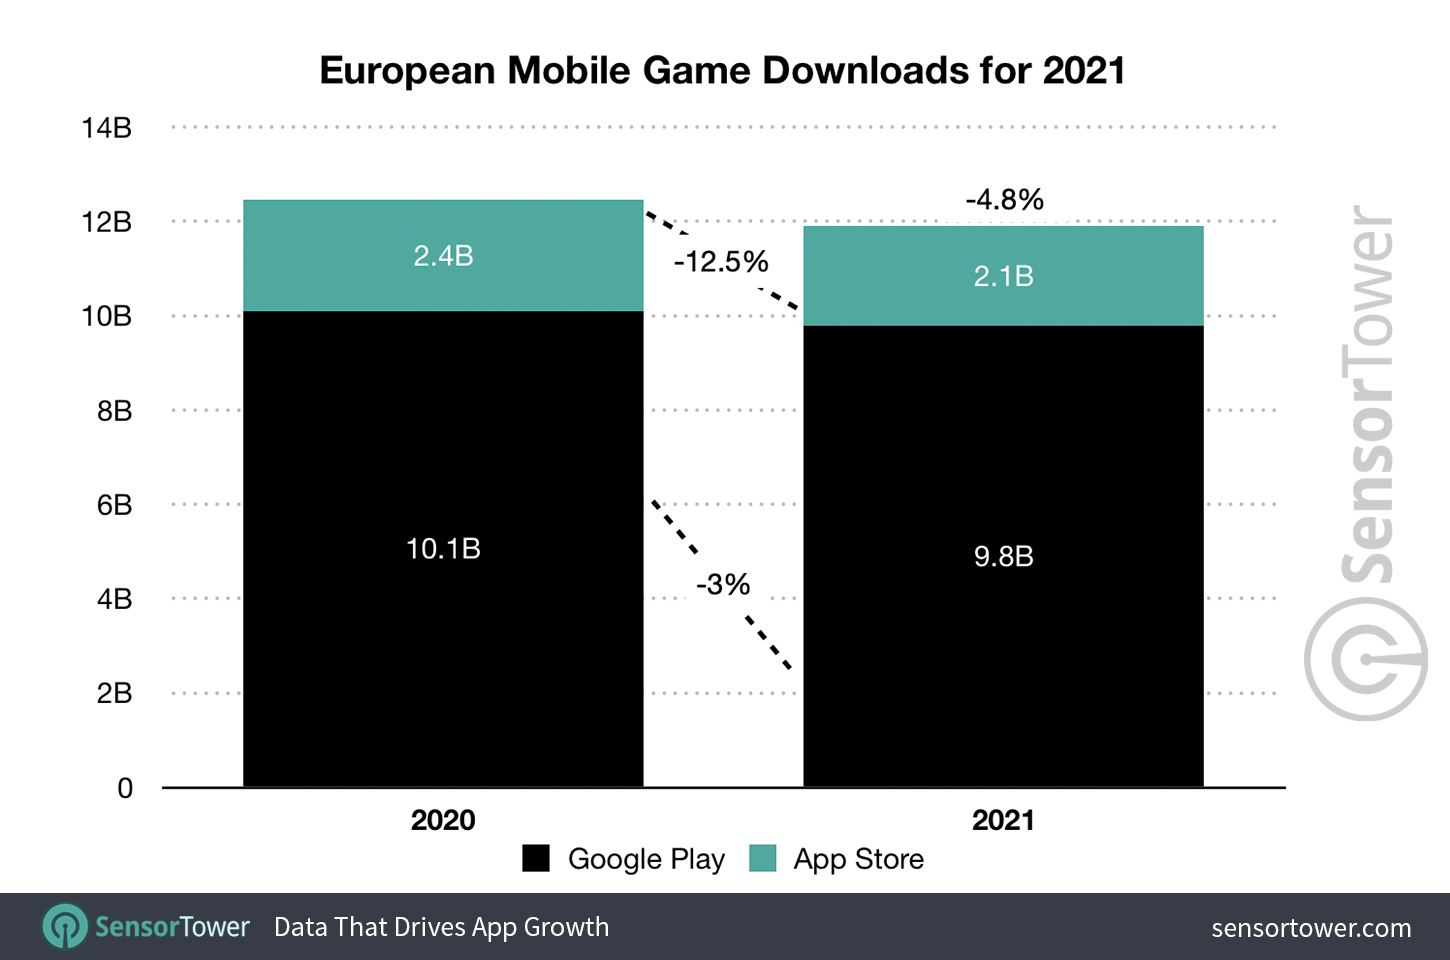 European Mobile Game Downloads for 2021